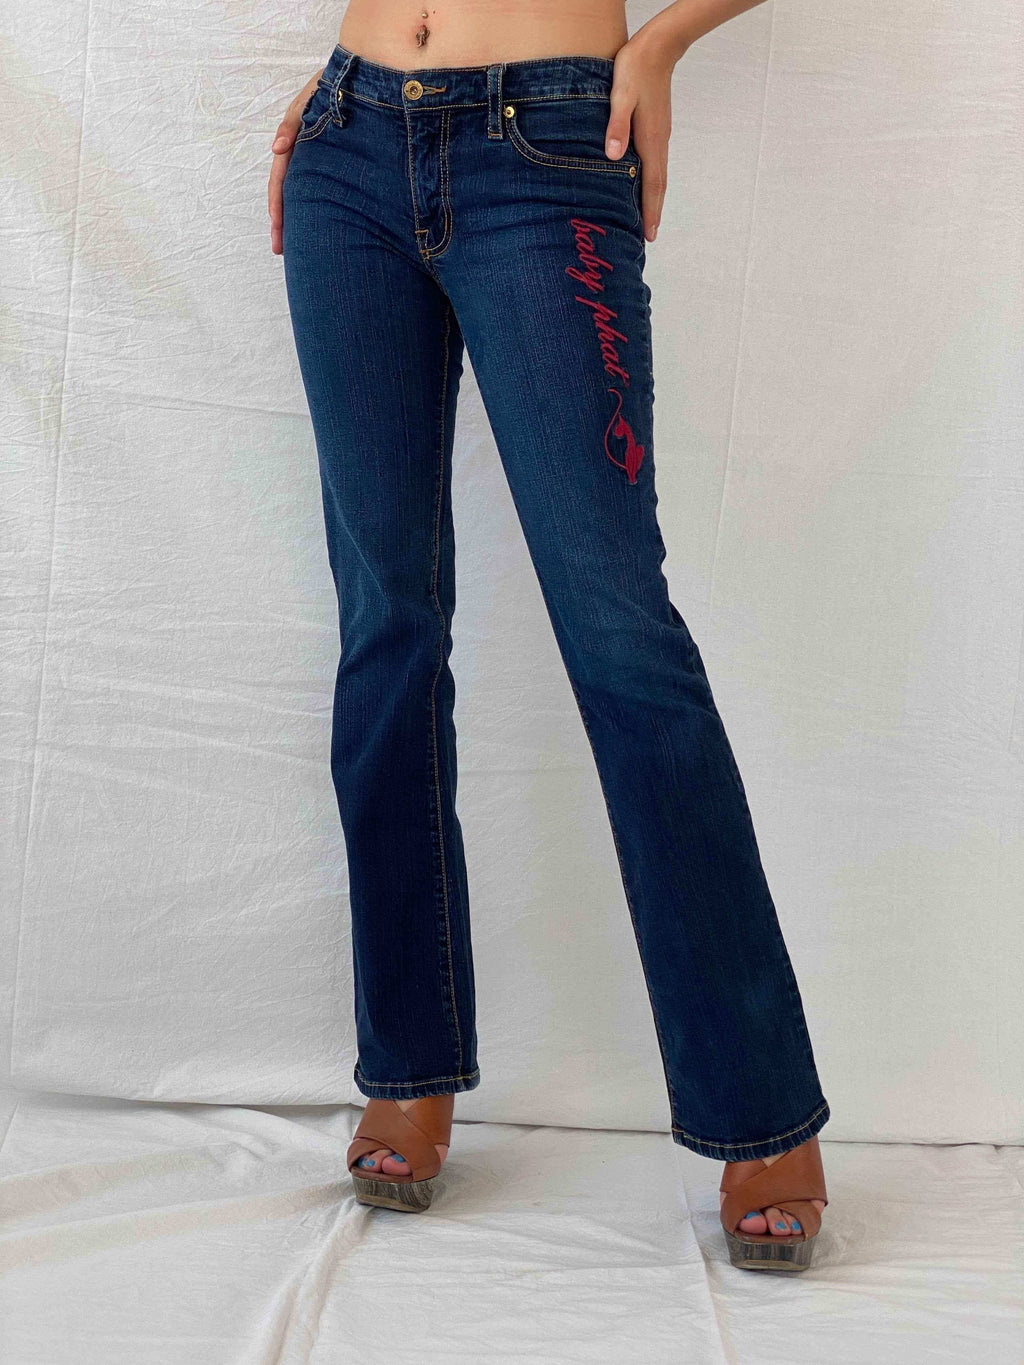 Baby Phat Y2K 2000s 90s Logo Flare Jeans Size 7